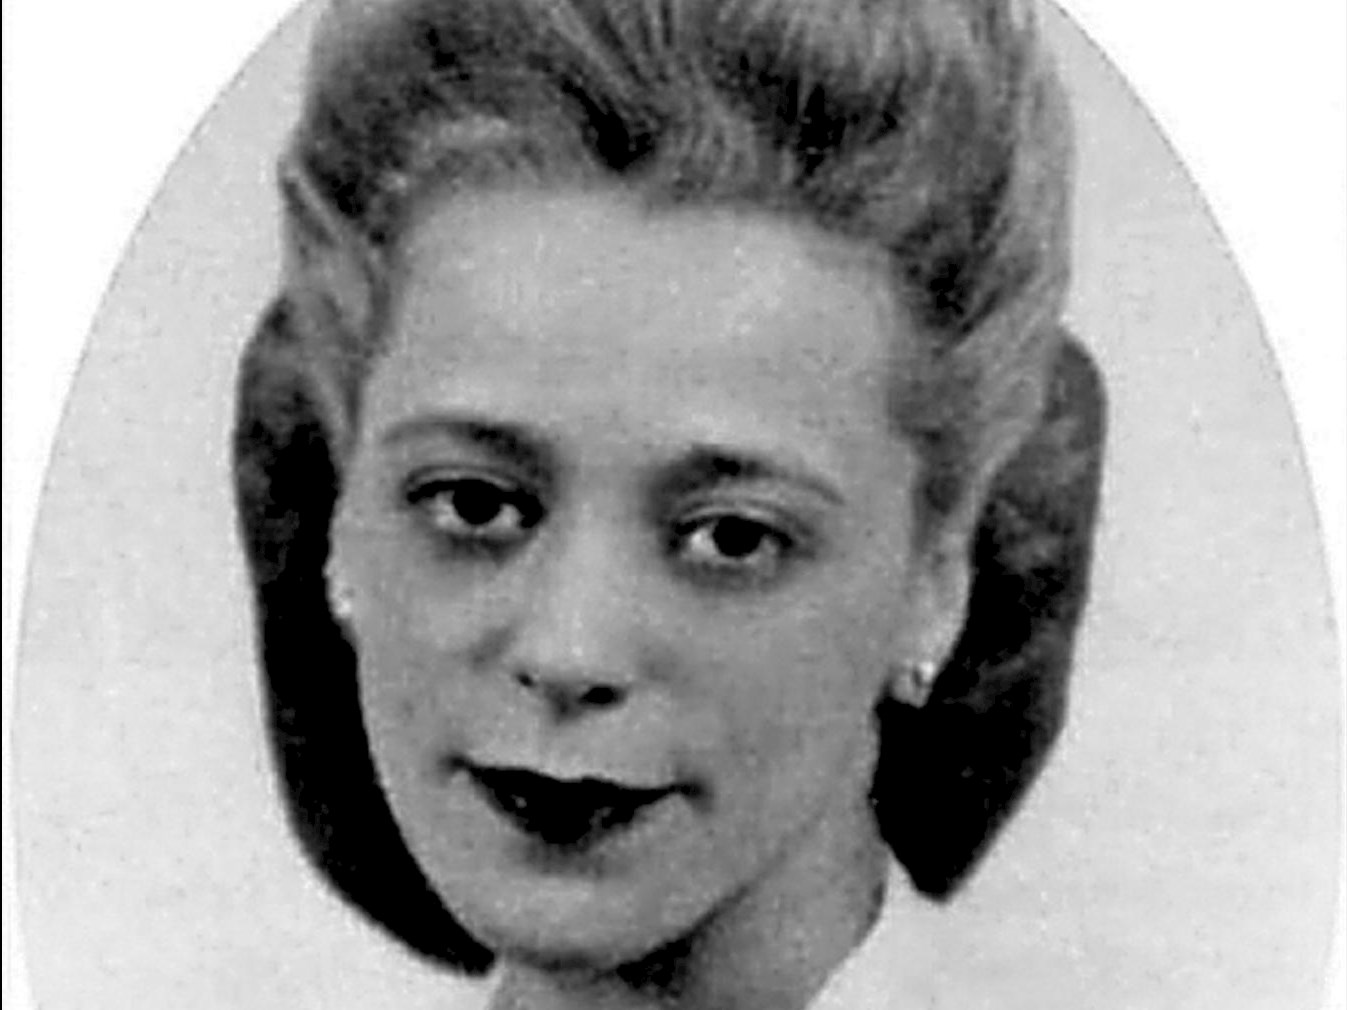 Viola Irene Desmond (born July 6, 1914, in Halifax and died February 1965, in New York)